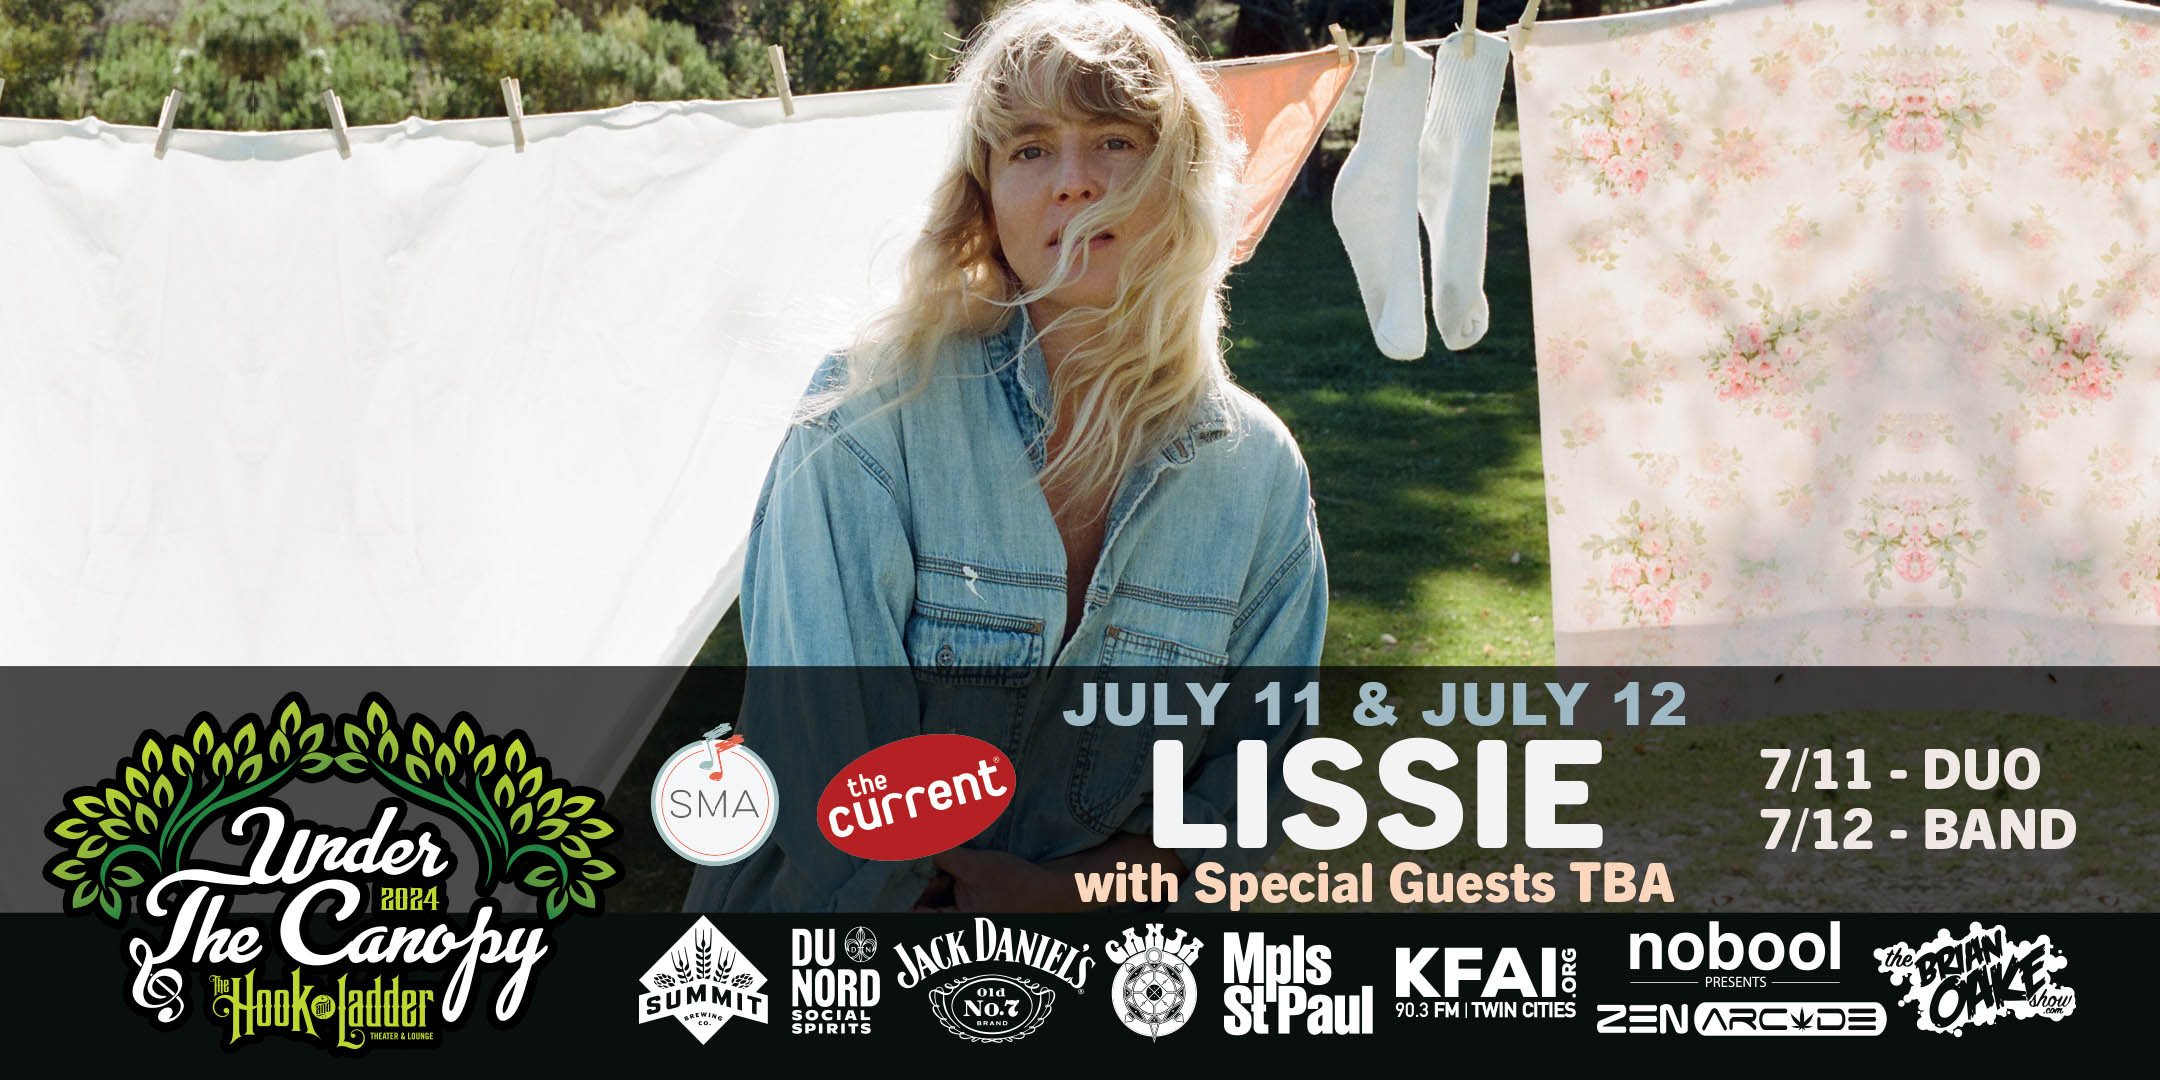 LISSIE (Full Band) with guest TBA Friday, July 12 Under The Canopy at The Hook and Ladder Theater "An Urban Outdoor Summer Concert Series" Doors 6:00pm :: Music 7:00pm :: 21+ VIP Meet & Greet: $107 (3 Song Acoustic Performance in Zen Arcade) GA: $32 ADV / $38 DOS